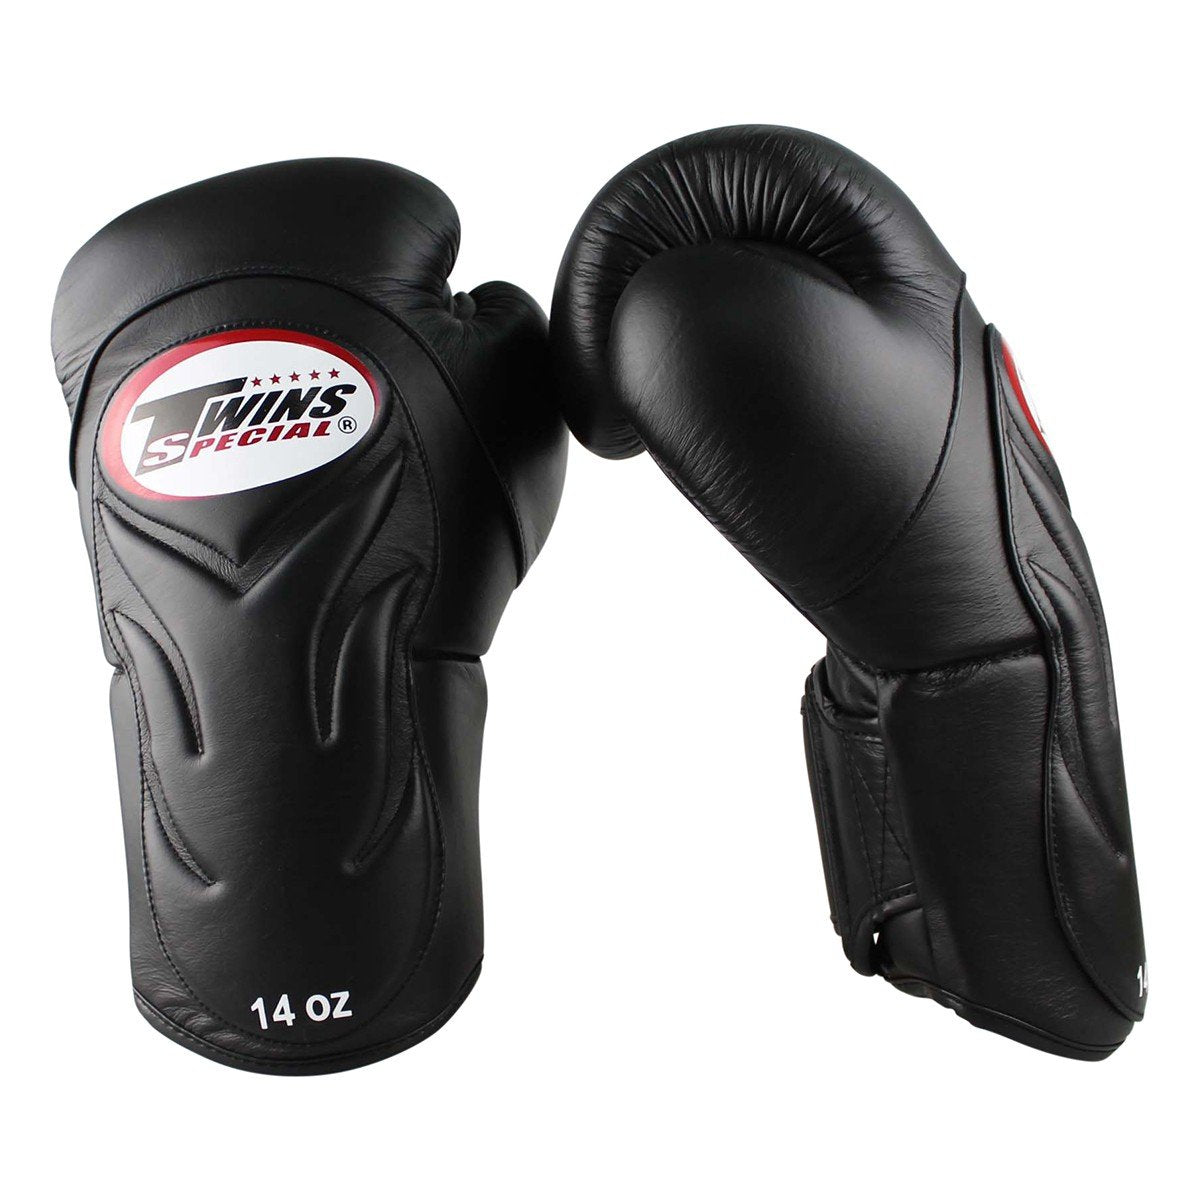 Twins Special Boxing Gloves BGVL6 Black